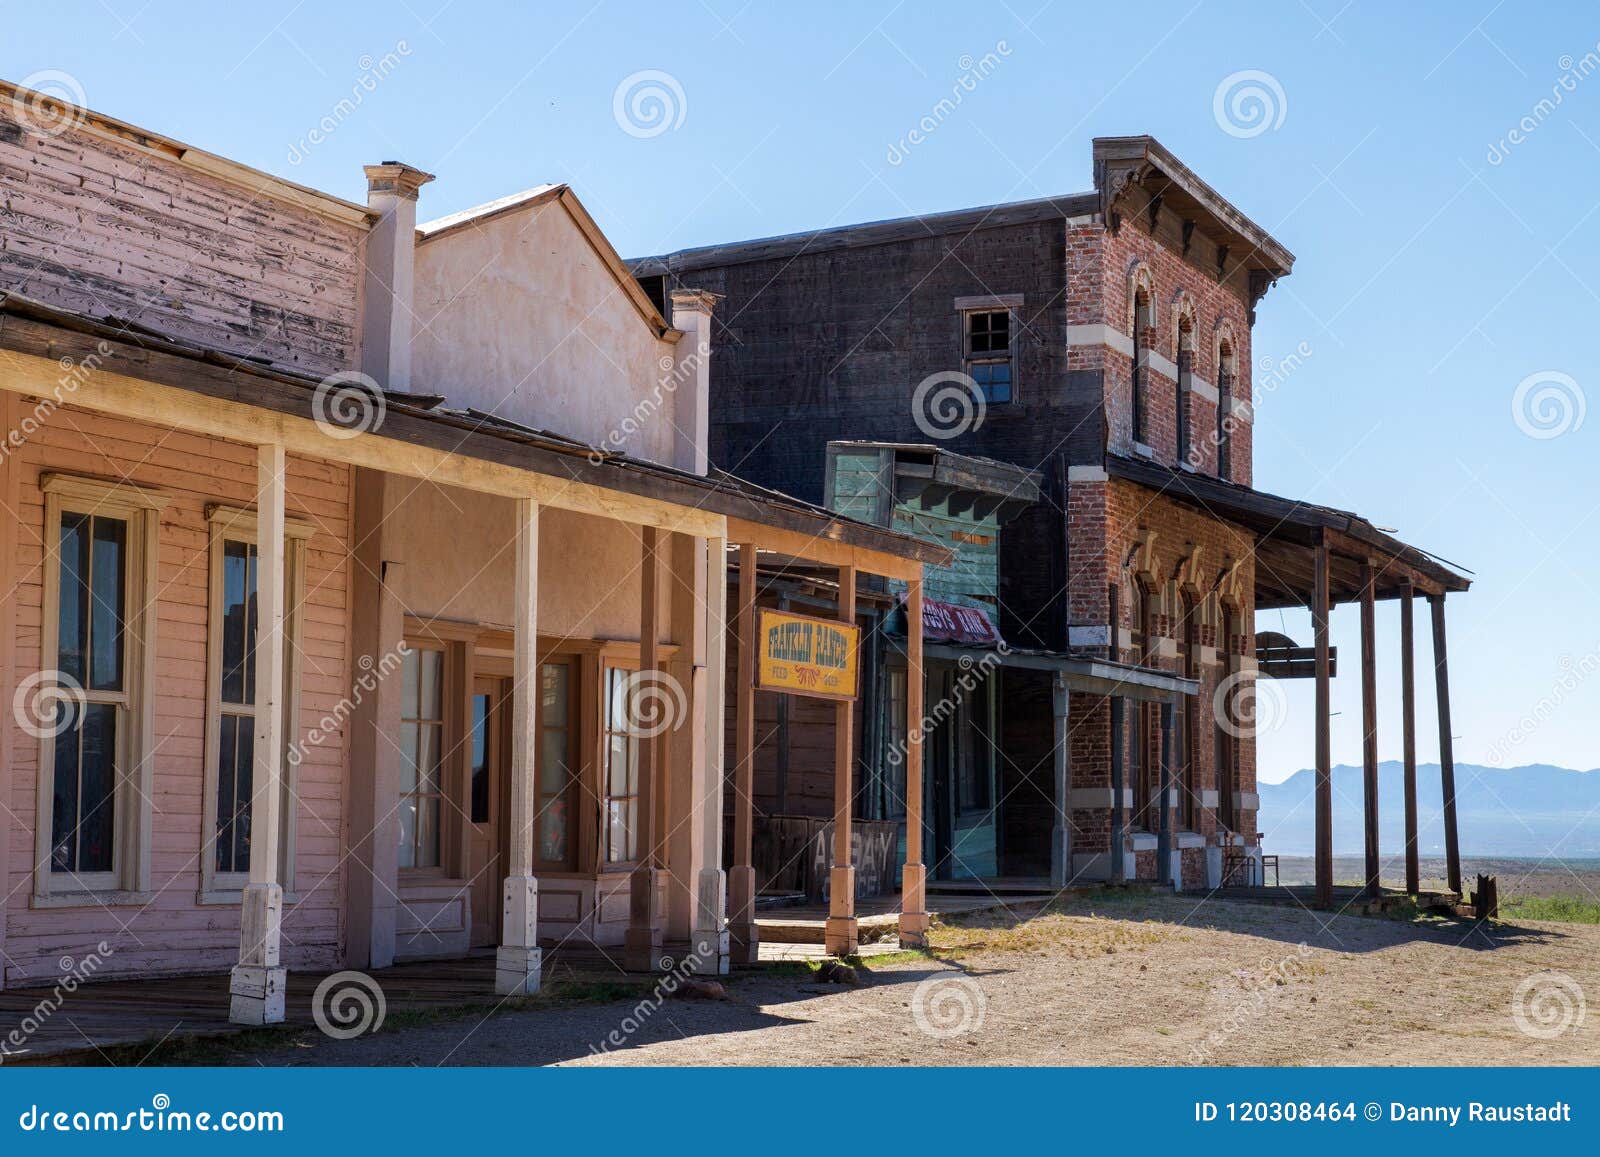 Old Wild West Town Movie Set In Mescal, Arizona Editorial Stock Image - Image of fifty ...1300 x 957